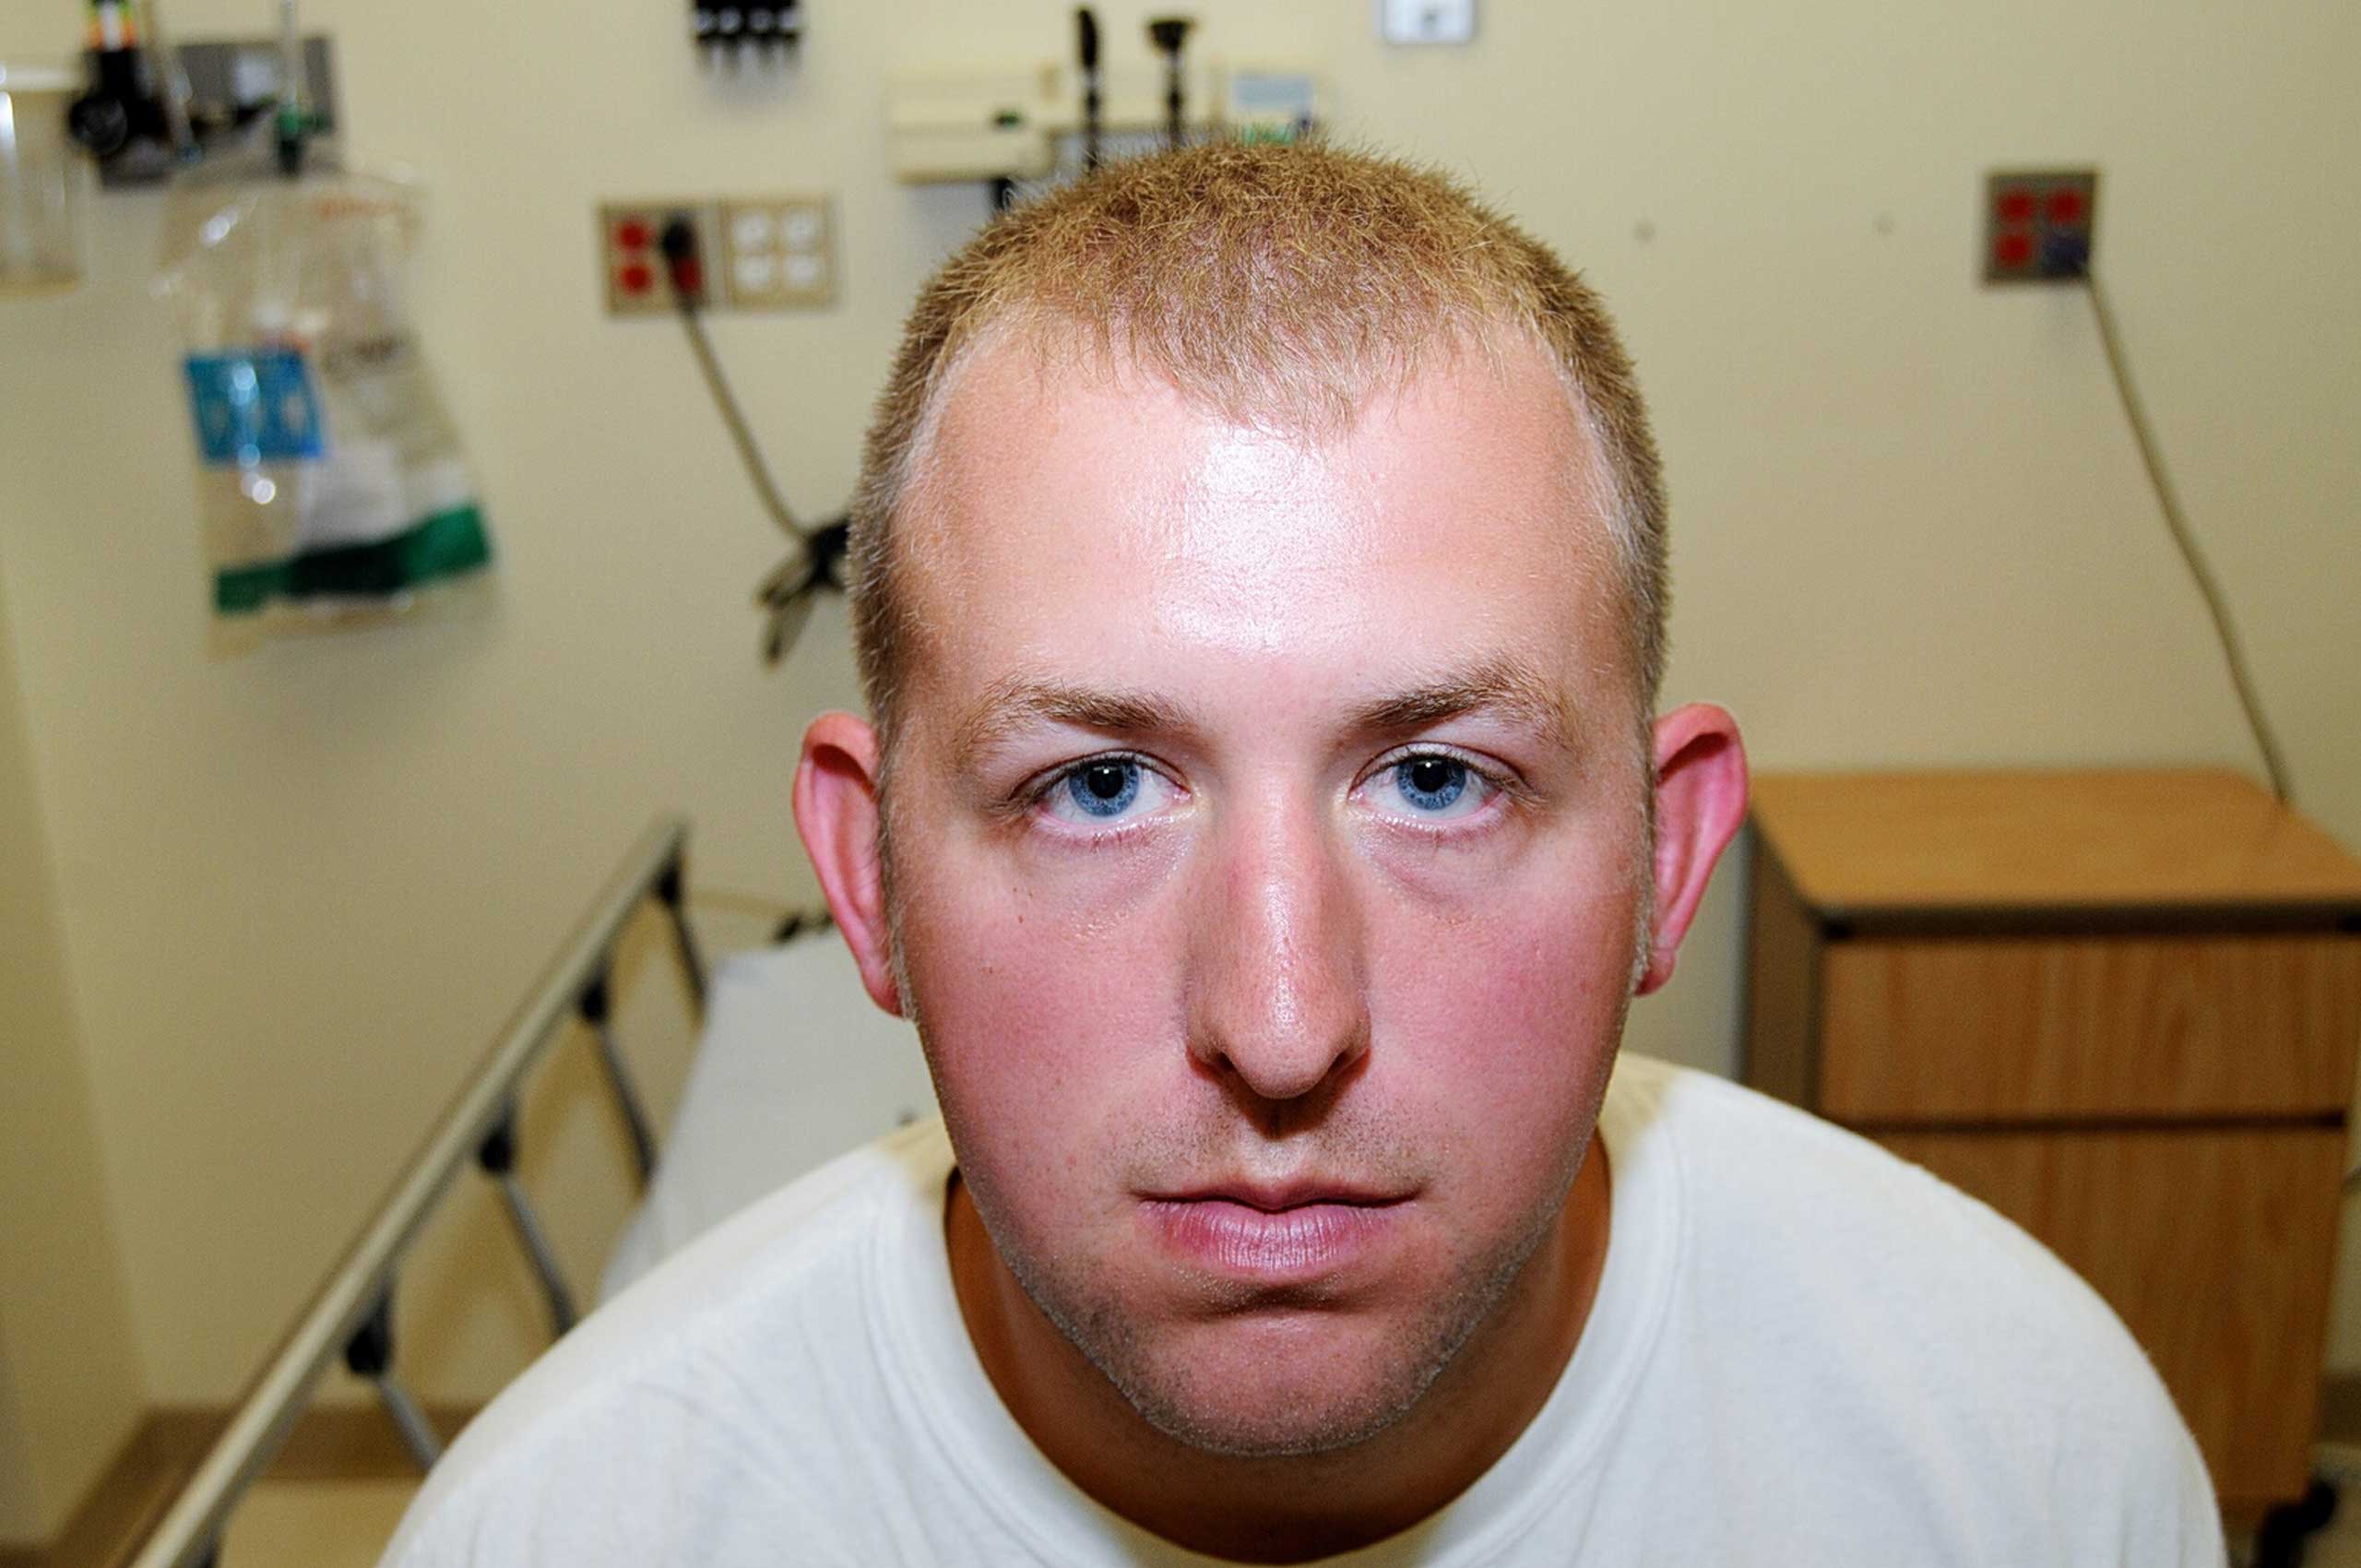 Ferguson police officer Darren Wilson is seen during his medical examination after the shooting of Michael Brown (St. Louis County)